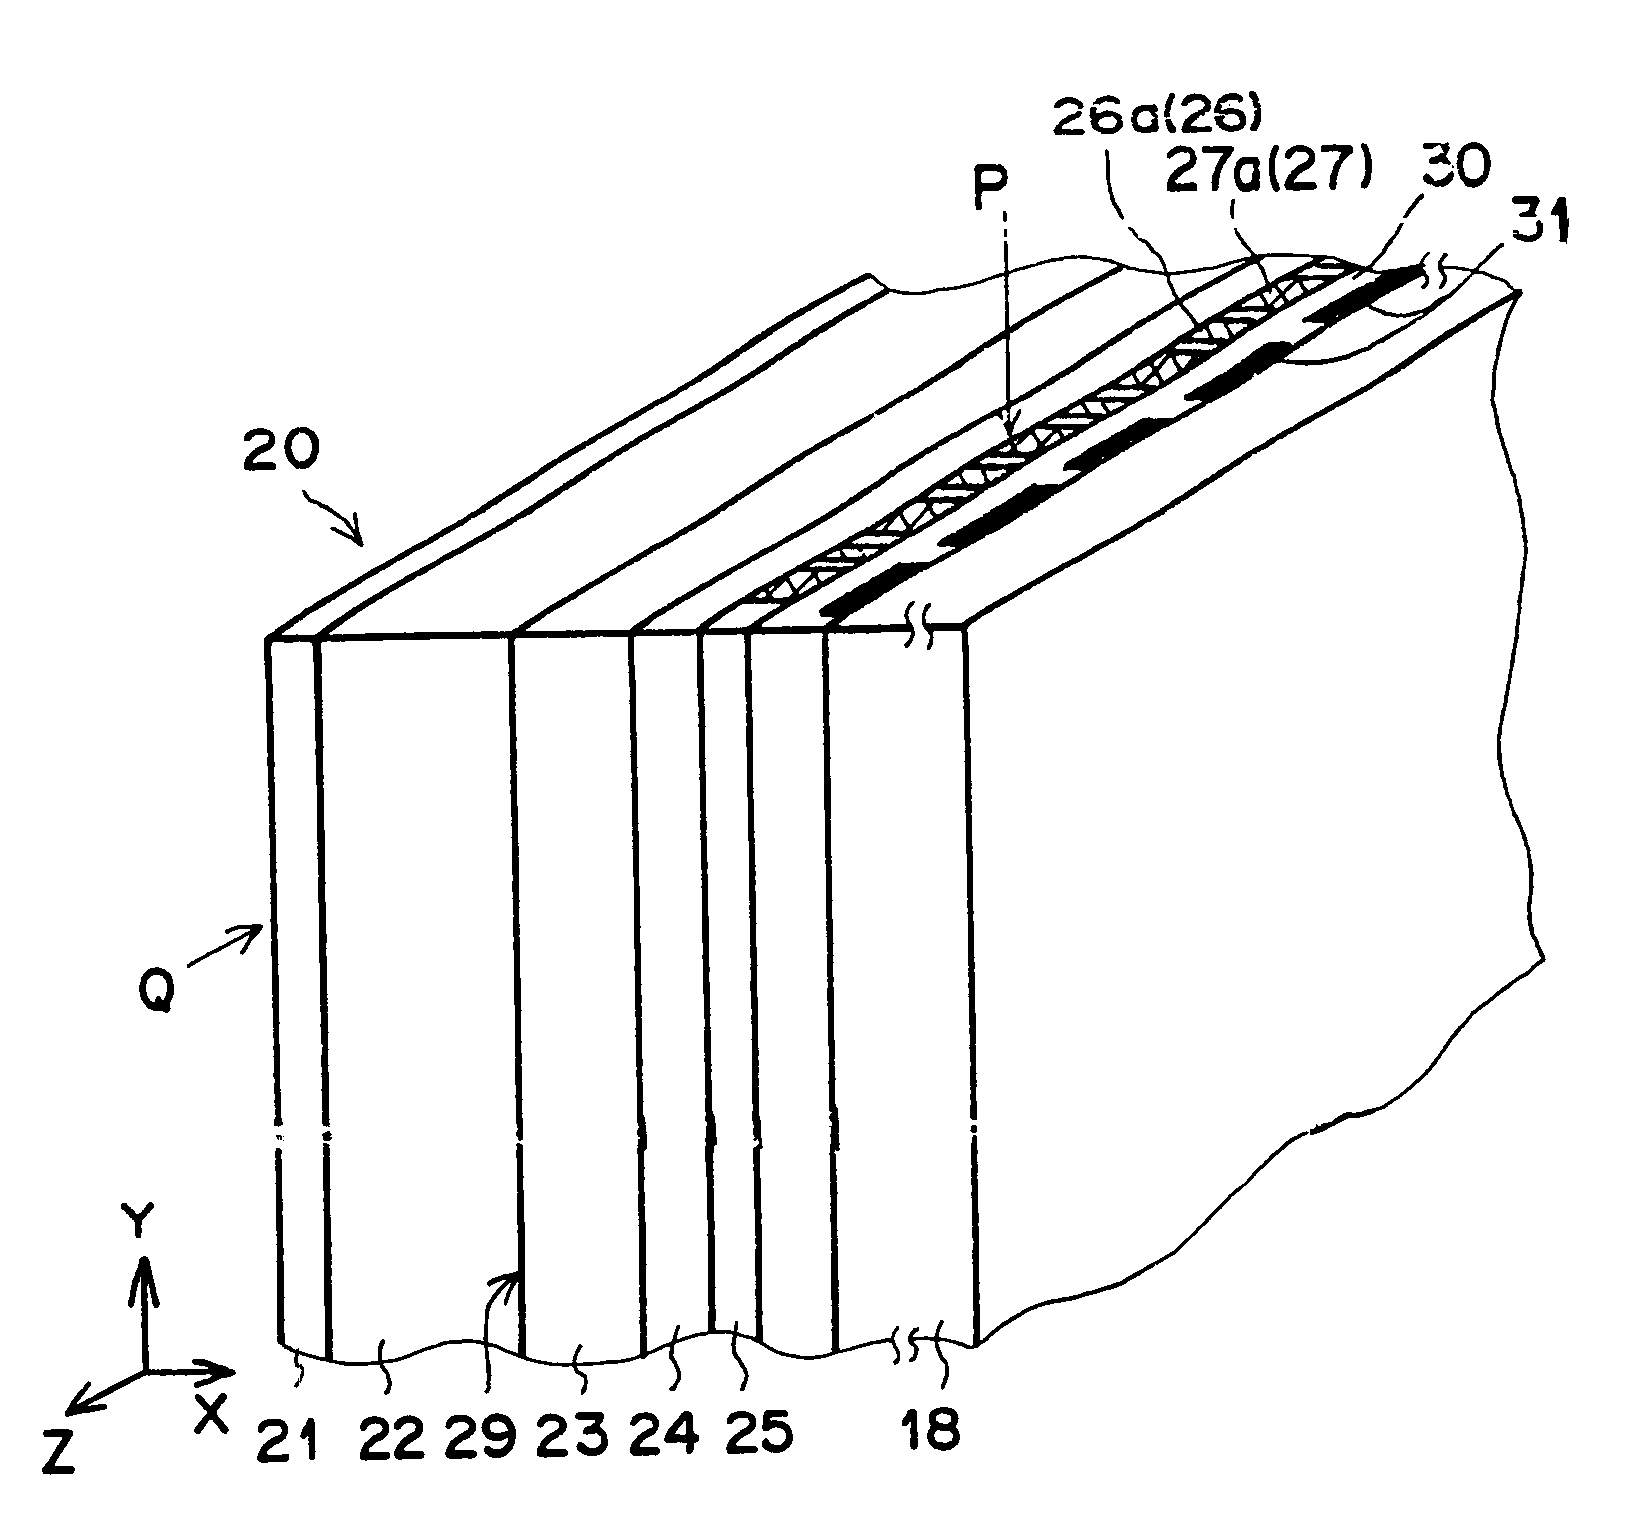 Image detector having photoconductive layer, linear electrodes transparent to reading light, and signal-readout electrodes shaded from reading light